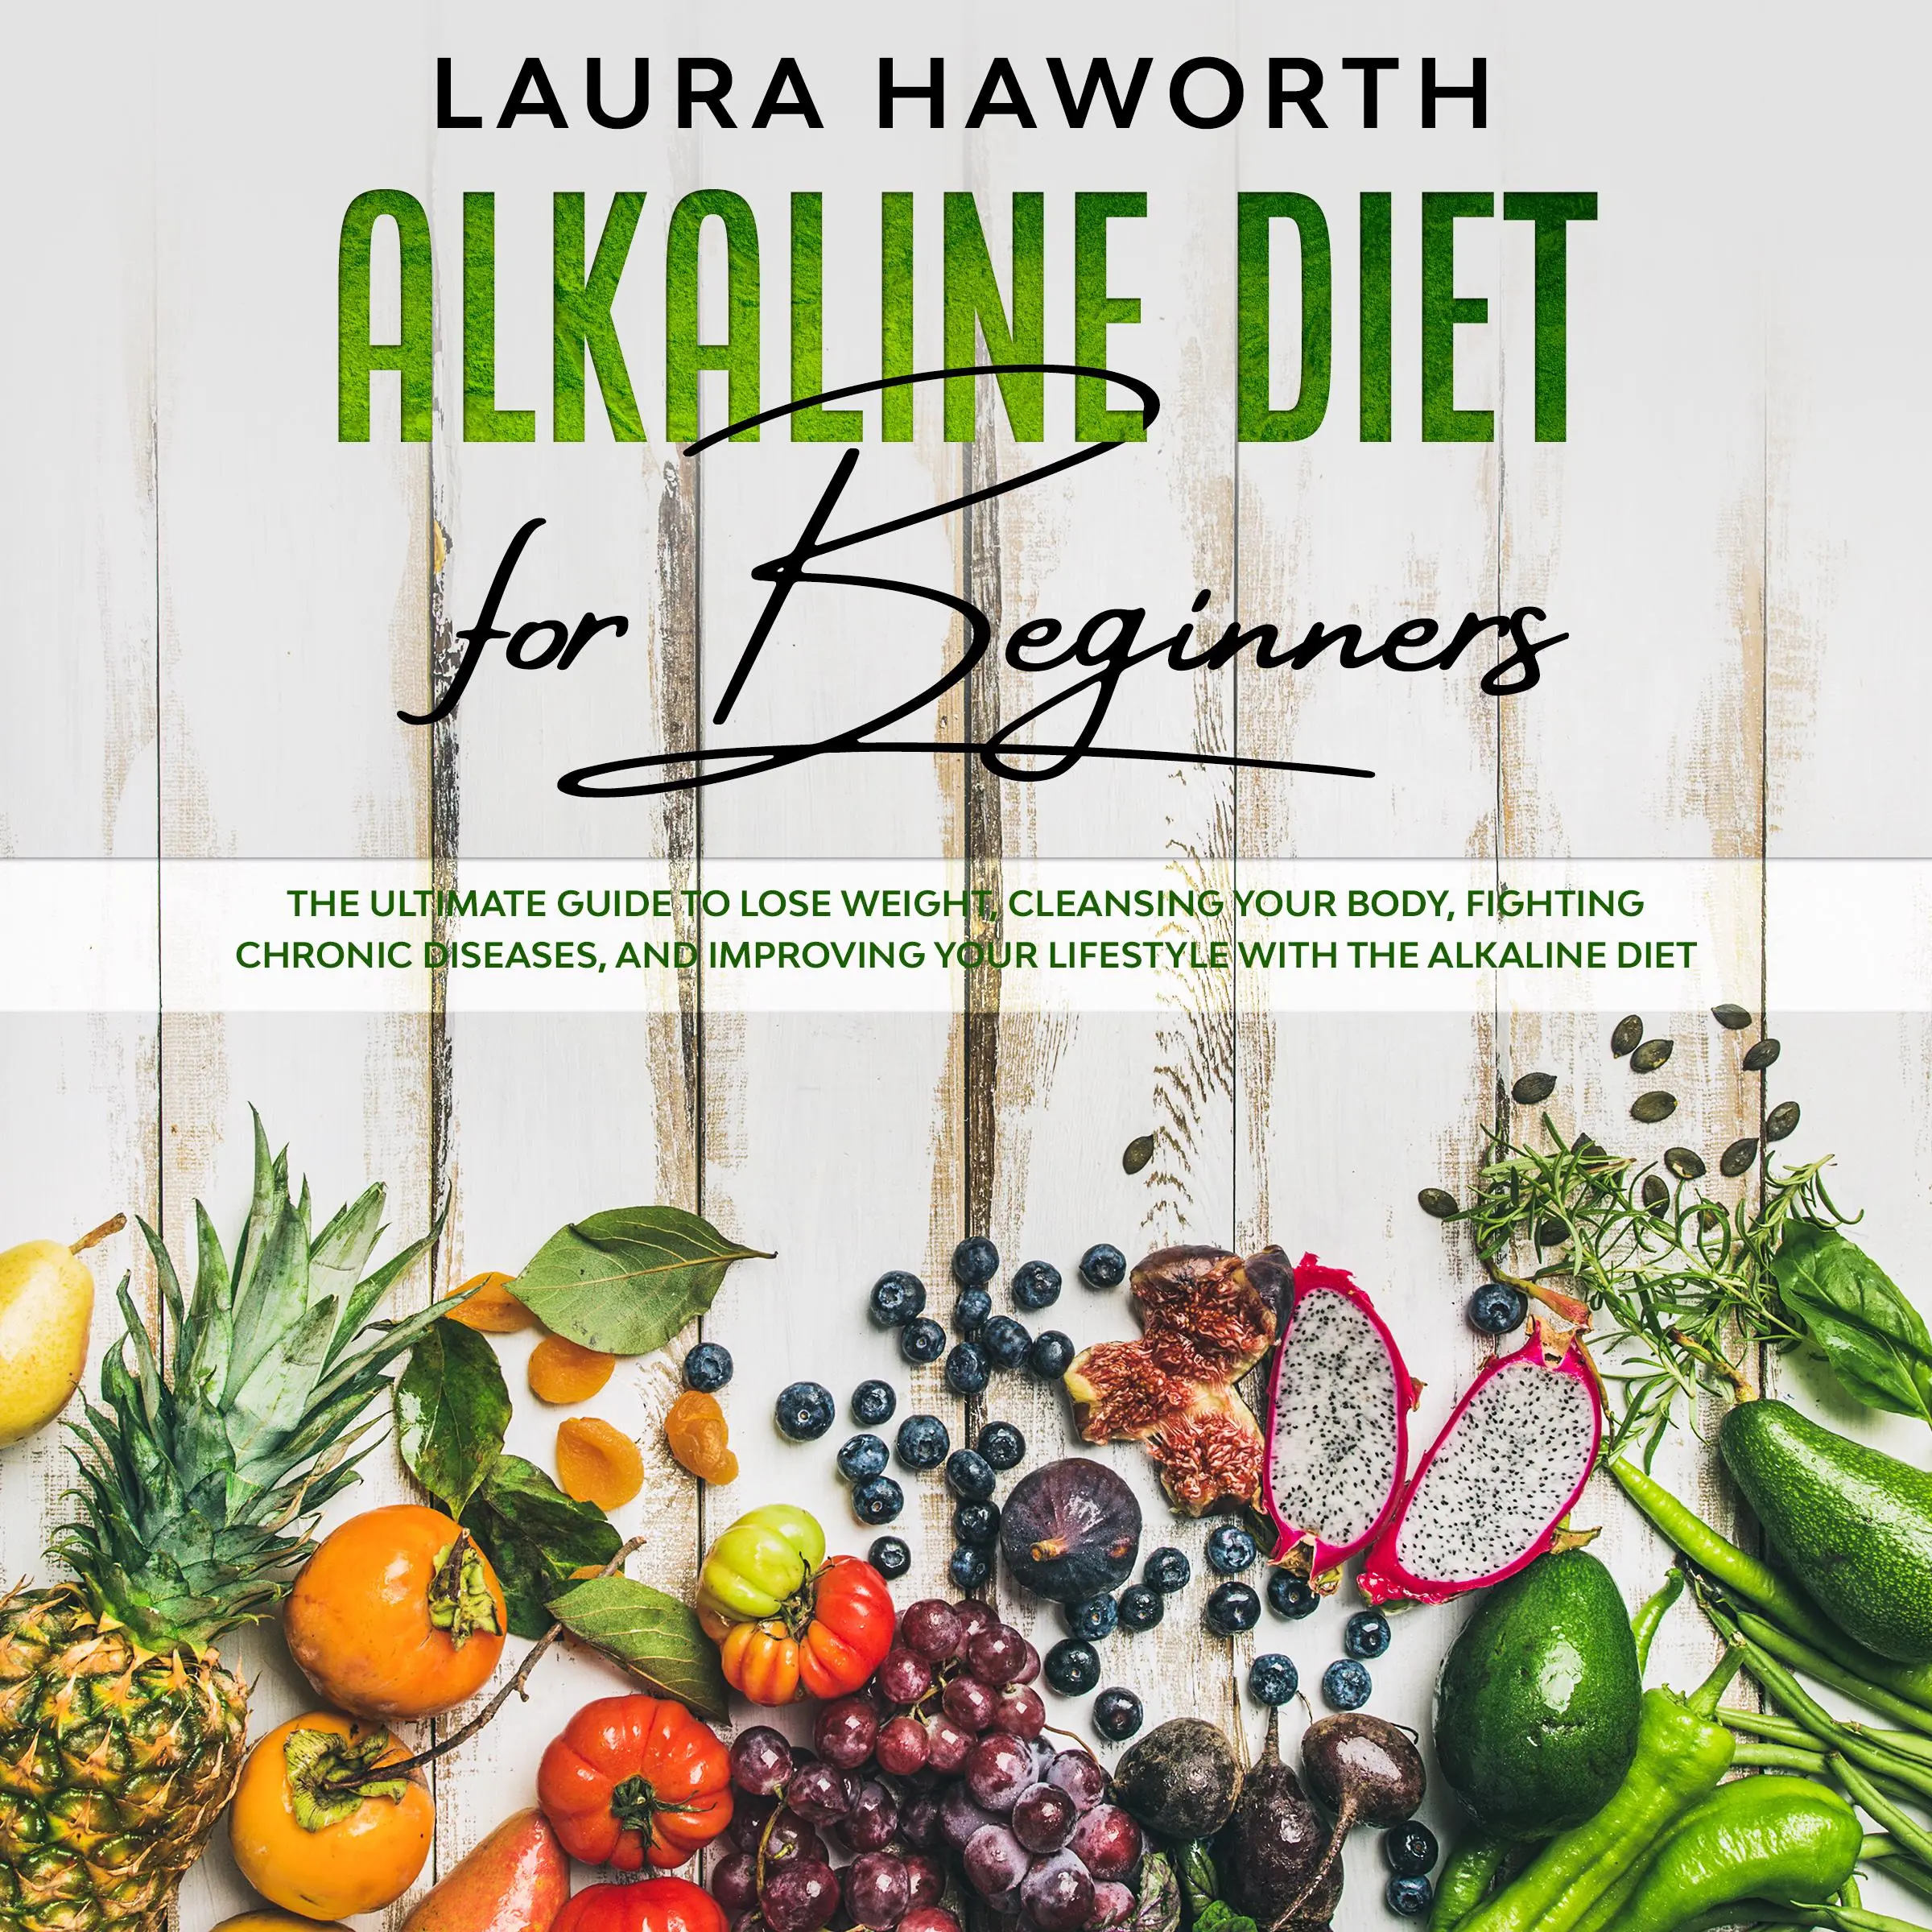 Alkaline Diet for Beginners: The Ultimate Guide to Lose Weight, Cleansing Your Body, Fighting Chronic Diseases, and Improving Your Lifestyle with the Alkaline Diet Audiobook by Laura Haworth